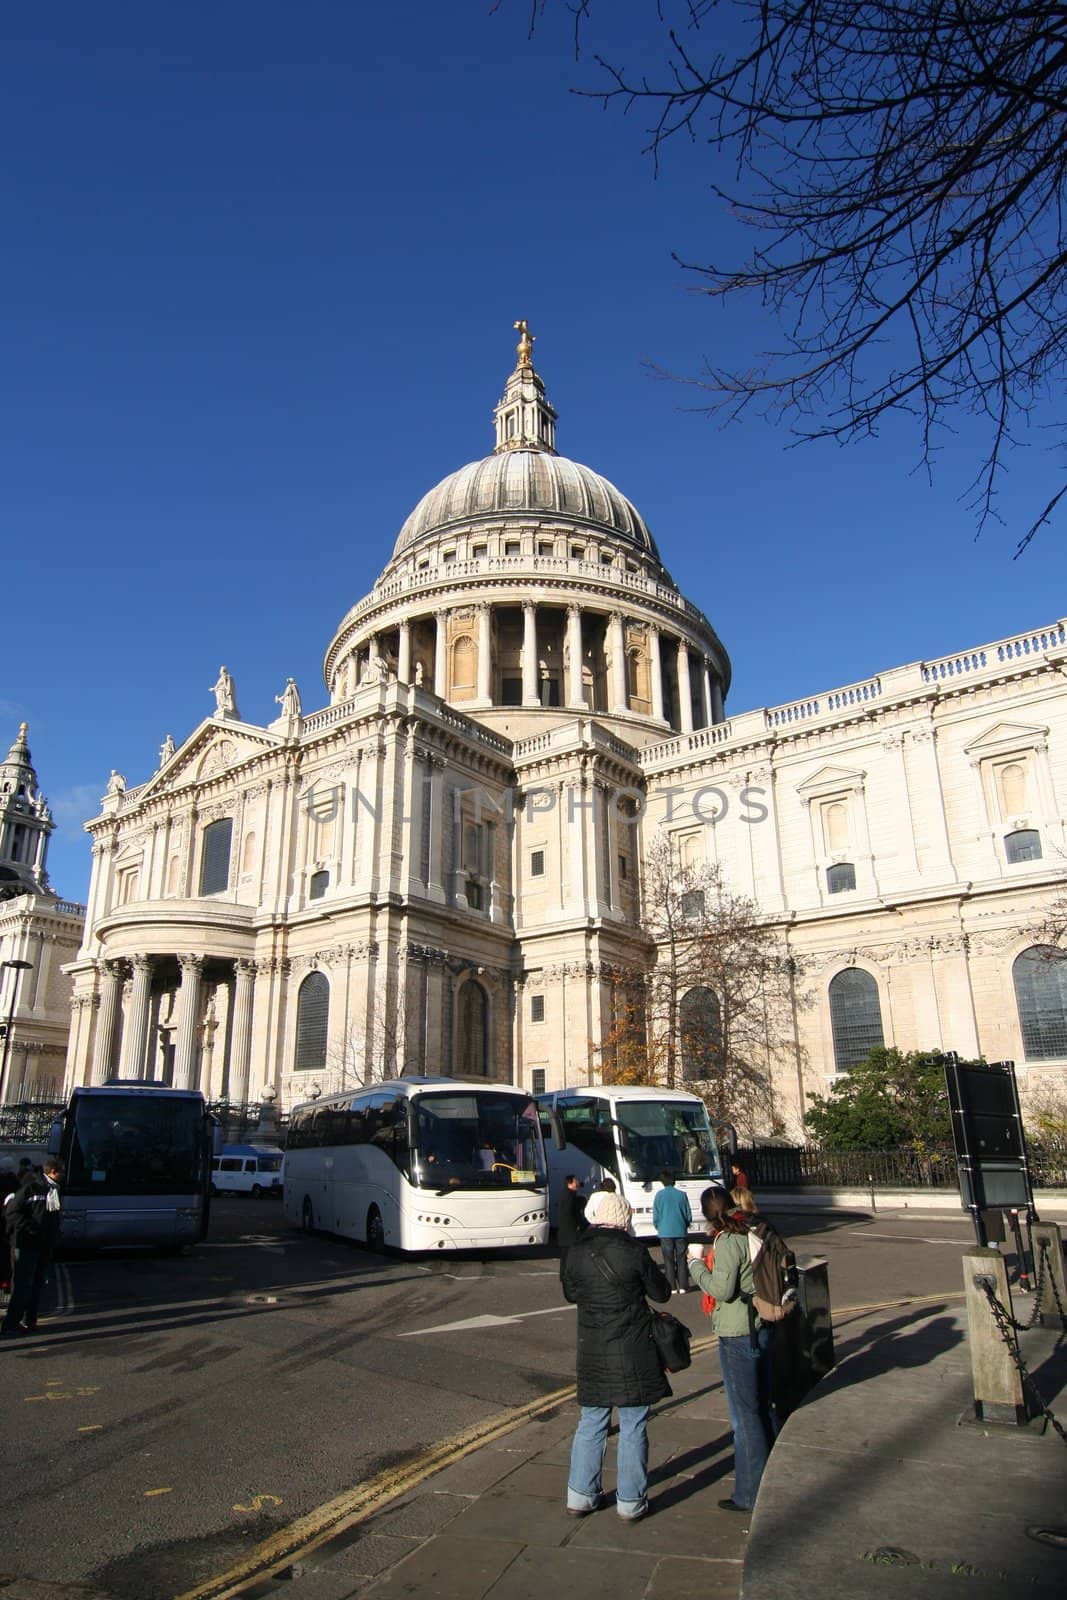 Tourists and coaches at St. Pauls in London